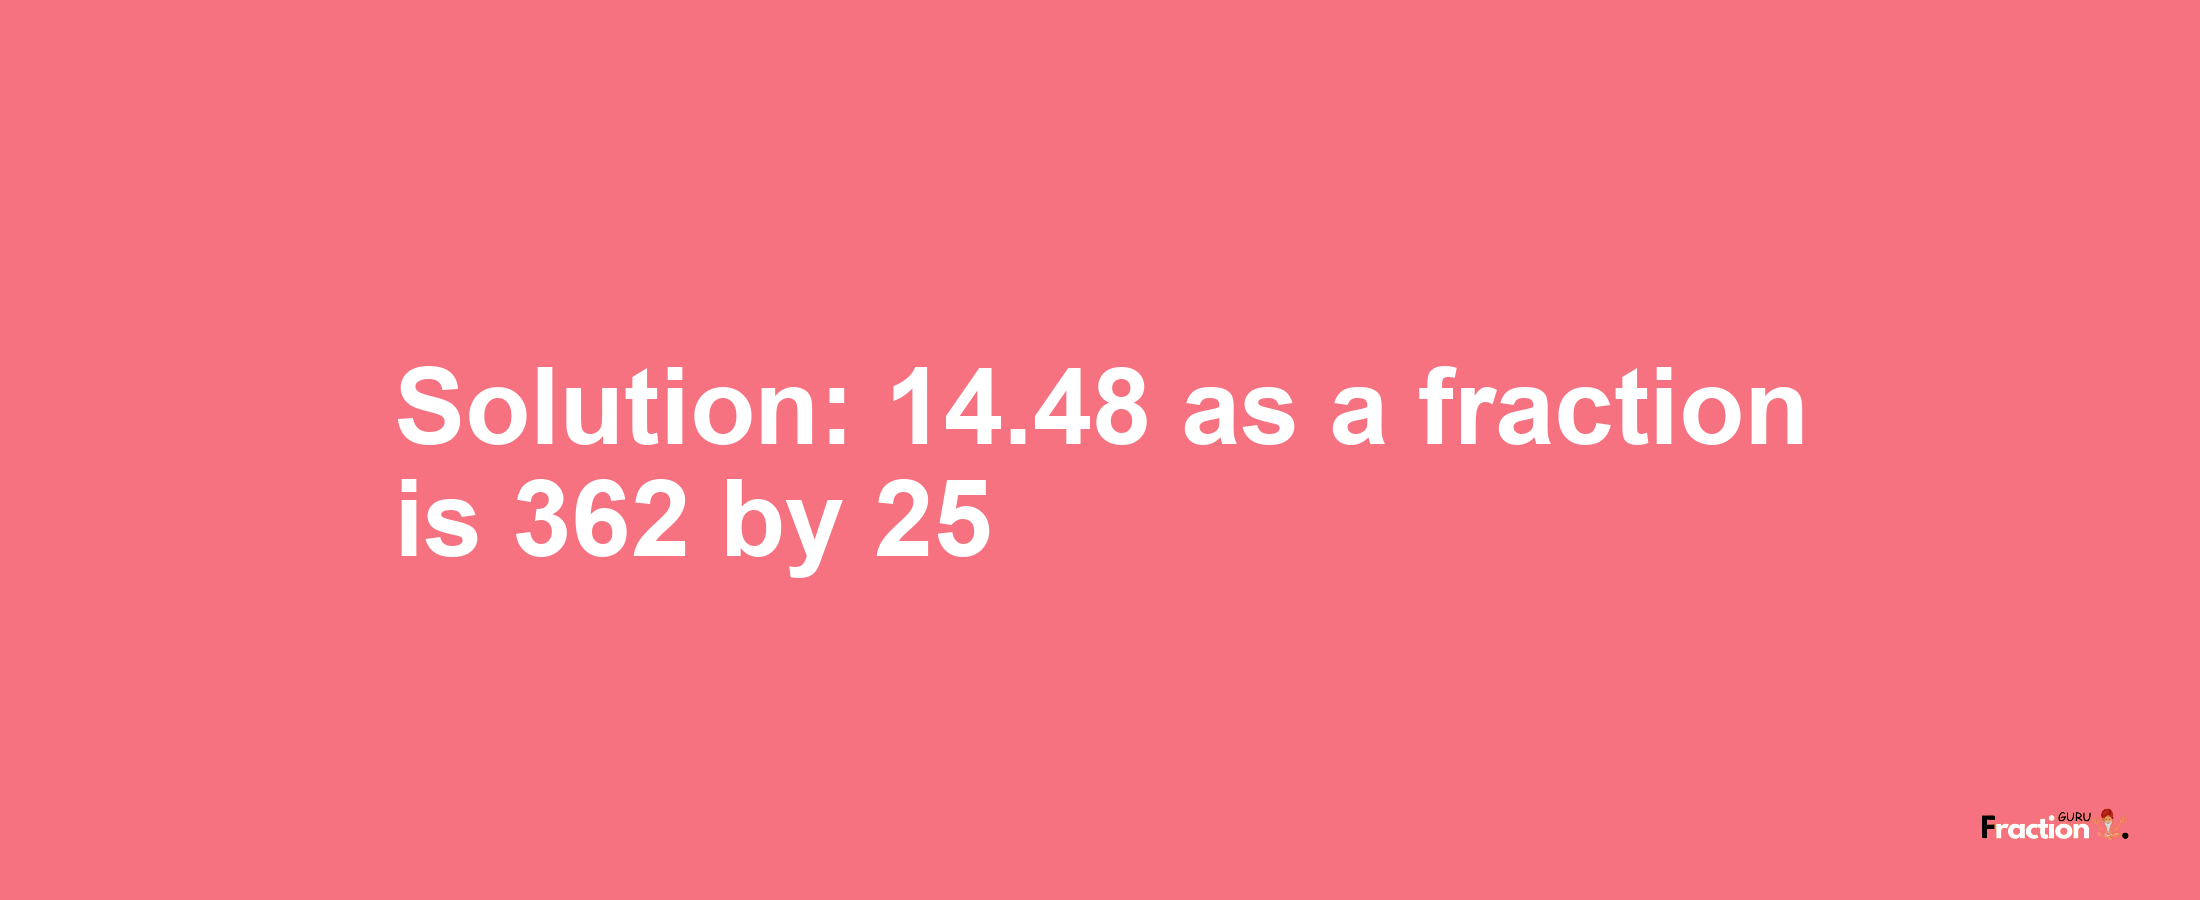 Solution:14.48 as a fraction is 362/25